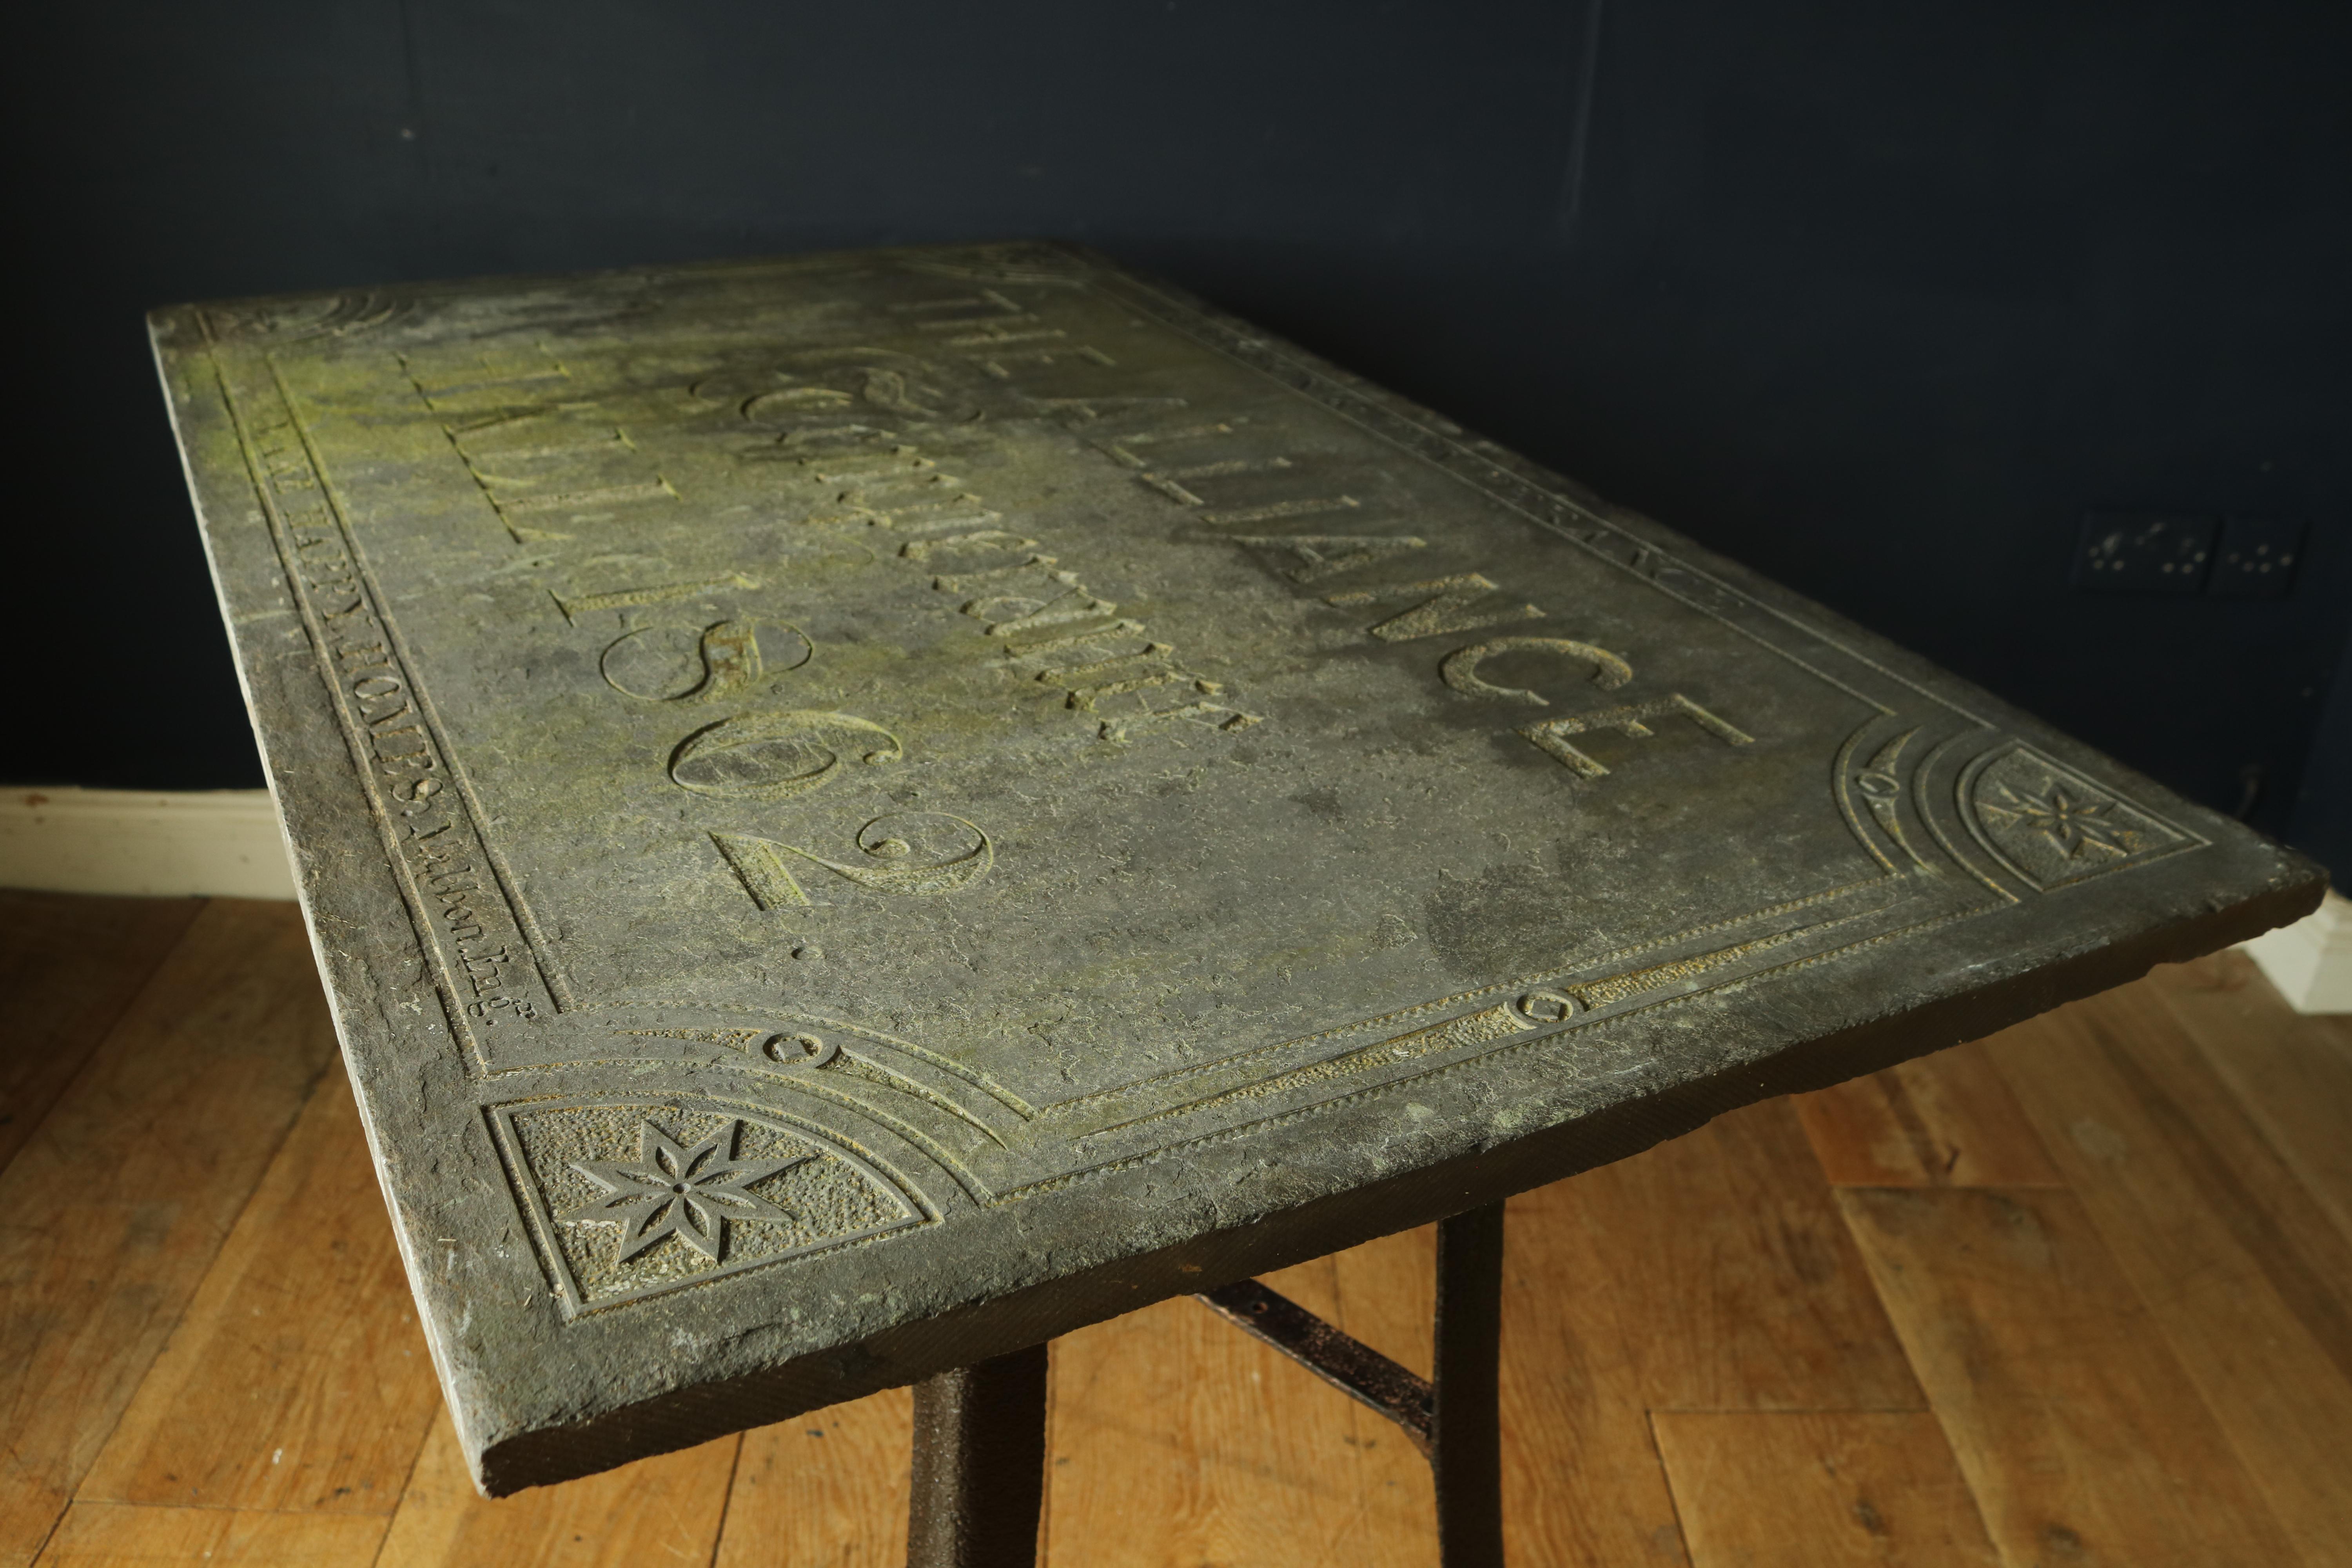 A fascinating 19th Cornish slate carved slab dating 1862. Carved into the slate reads: On the top edge “Religion & Temperance” and in the middle section “The Alliance Temperance Hall 1862” and on the bottom section: “Make Happy Homes” signed Mabbort